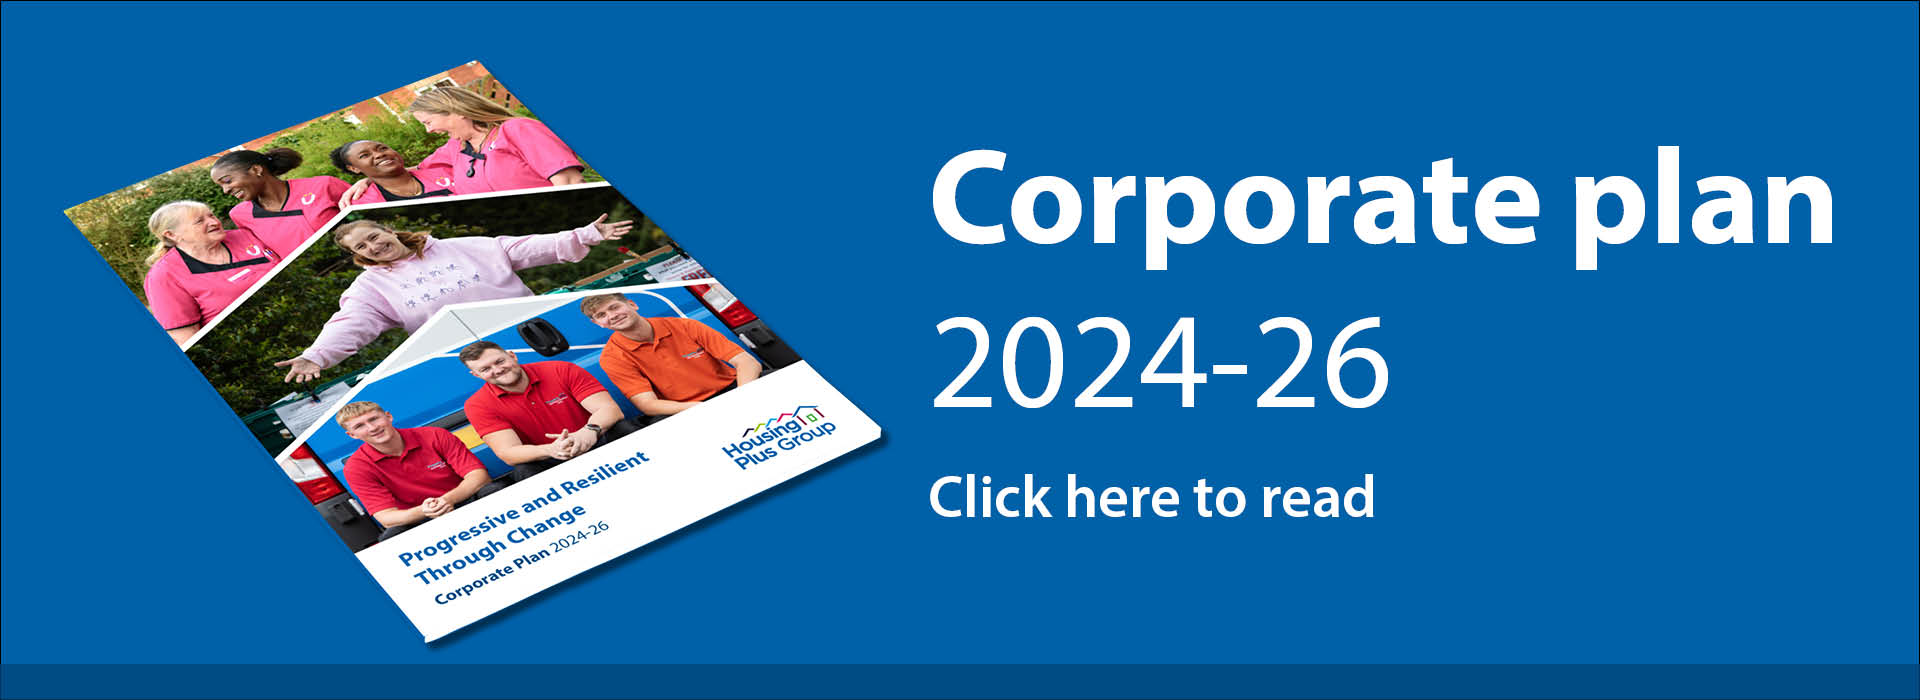 Corporate plan 2024-26 - click here to read